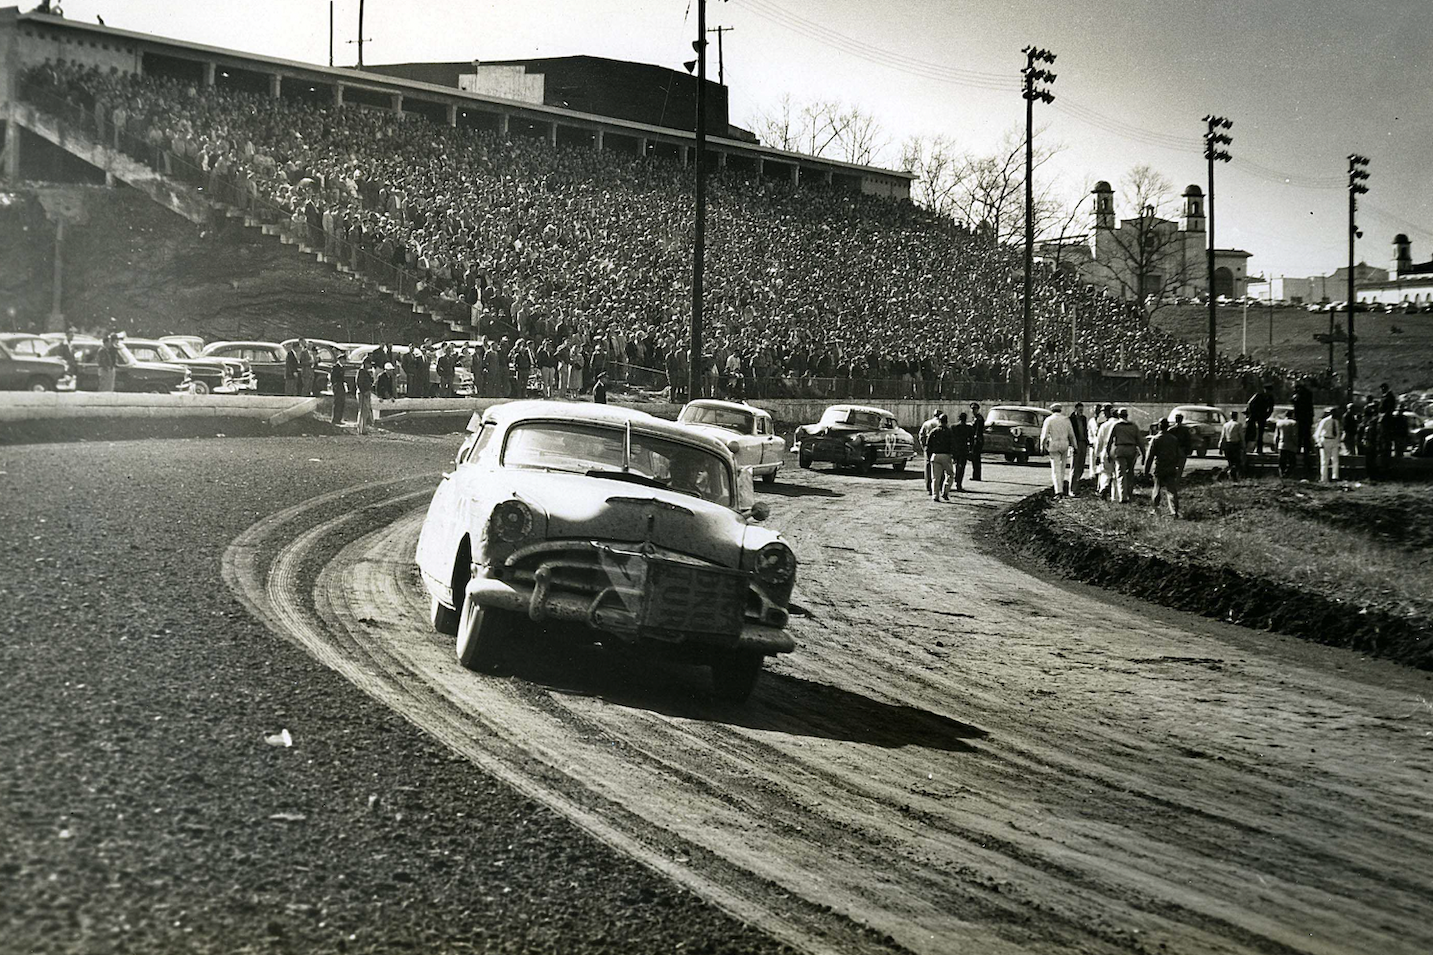 Herb Thomas and his Fabulous Hudson Hornet leads the field at Atlanta’s Lakewood Speedway at a race in 1954 that he went on to win. 